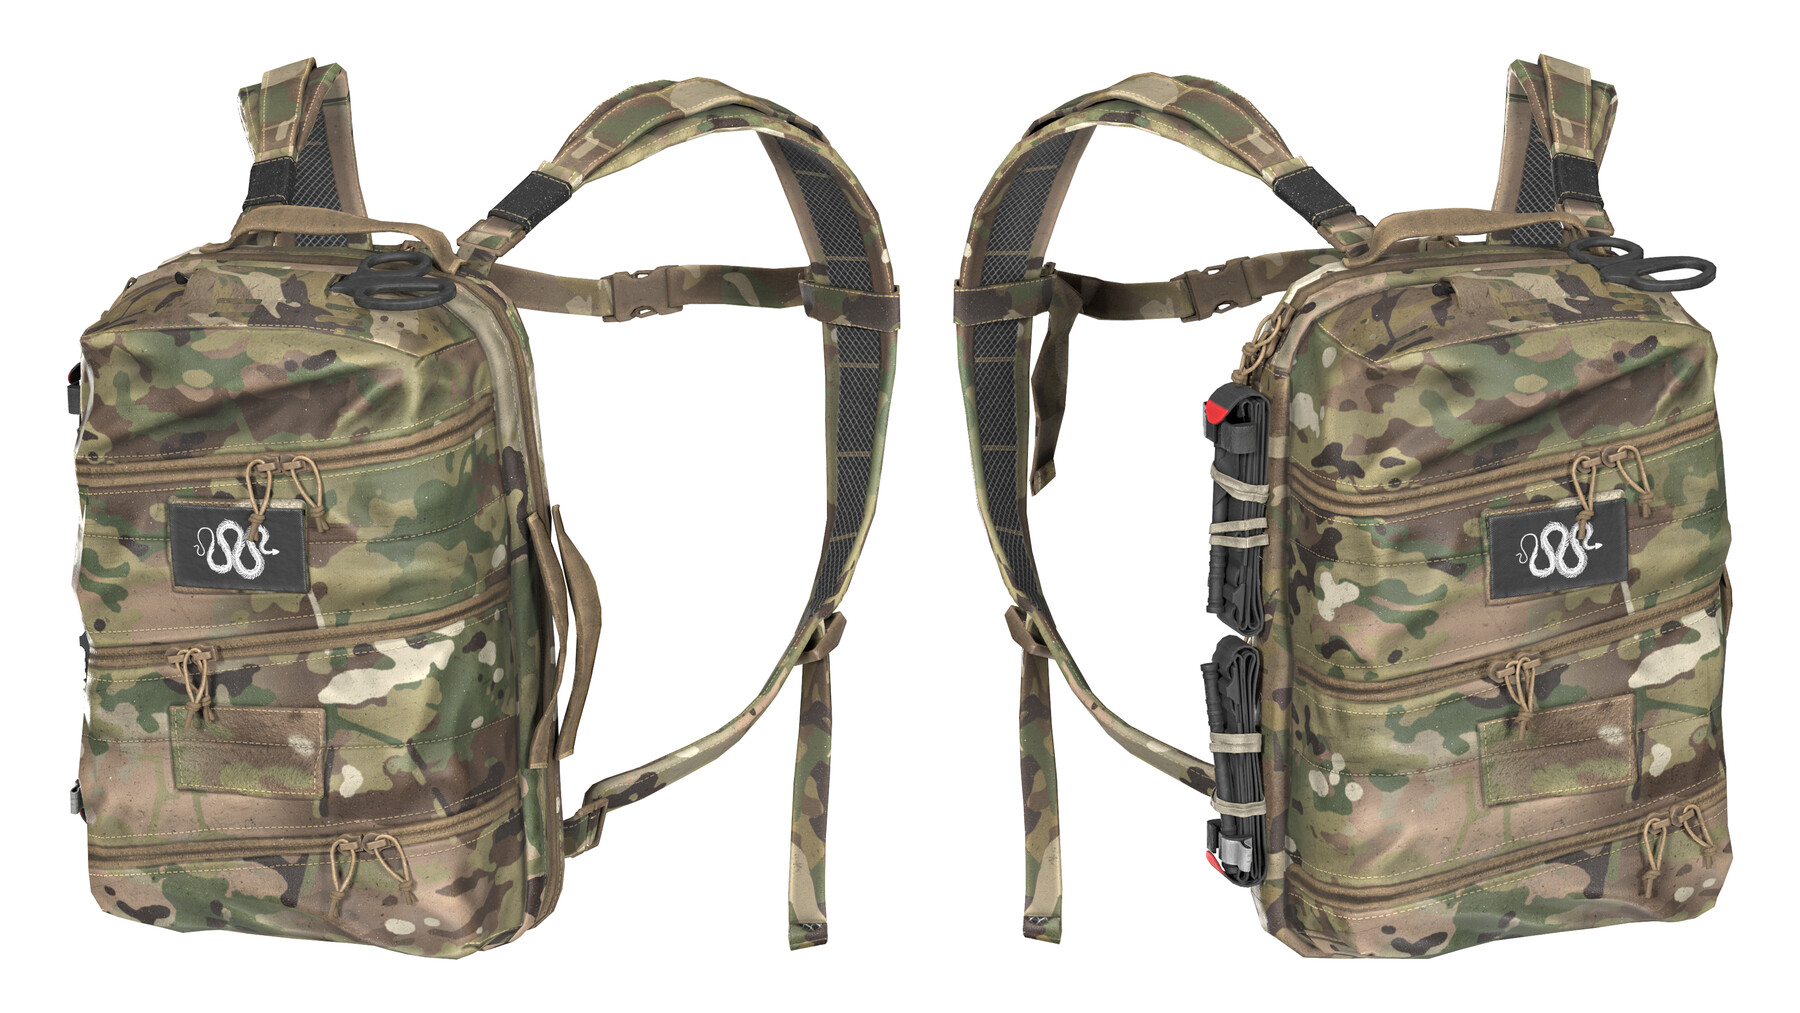 Emerson Assault Backpack/Removable Operator Pack Multicam buy with